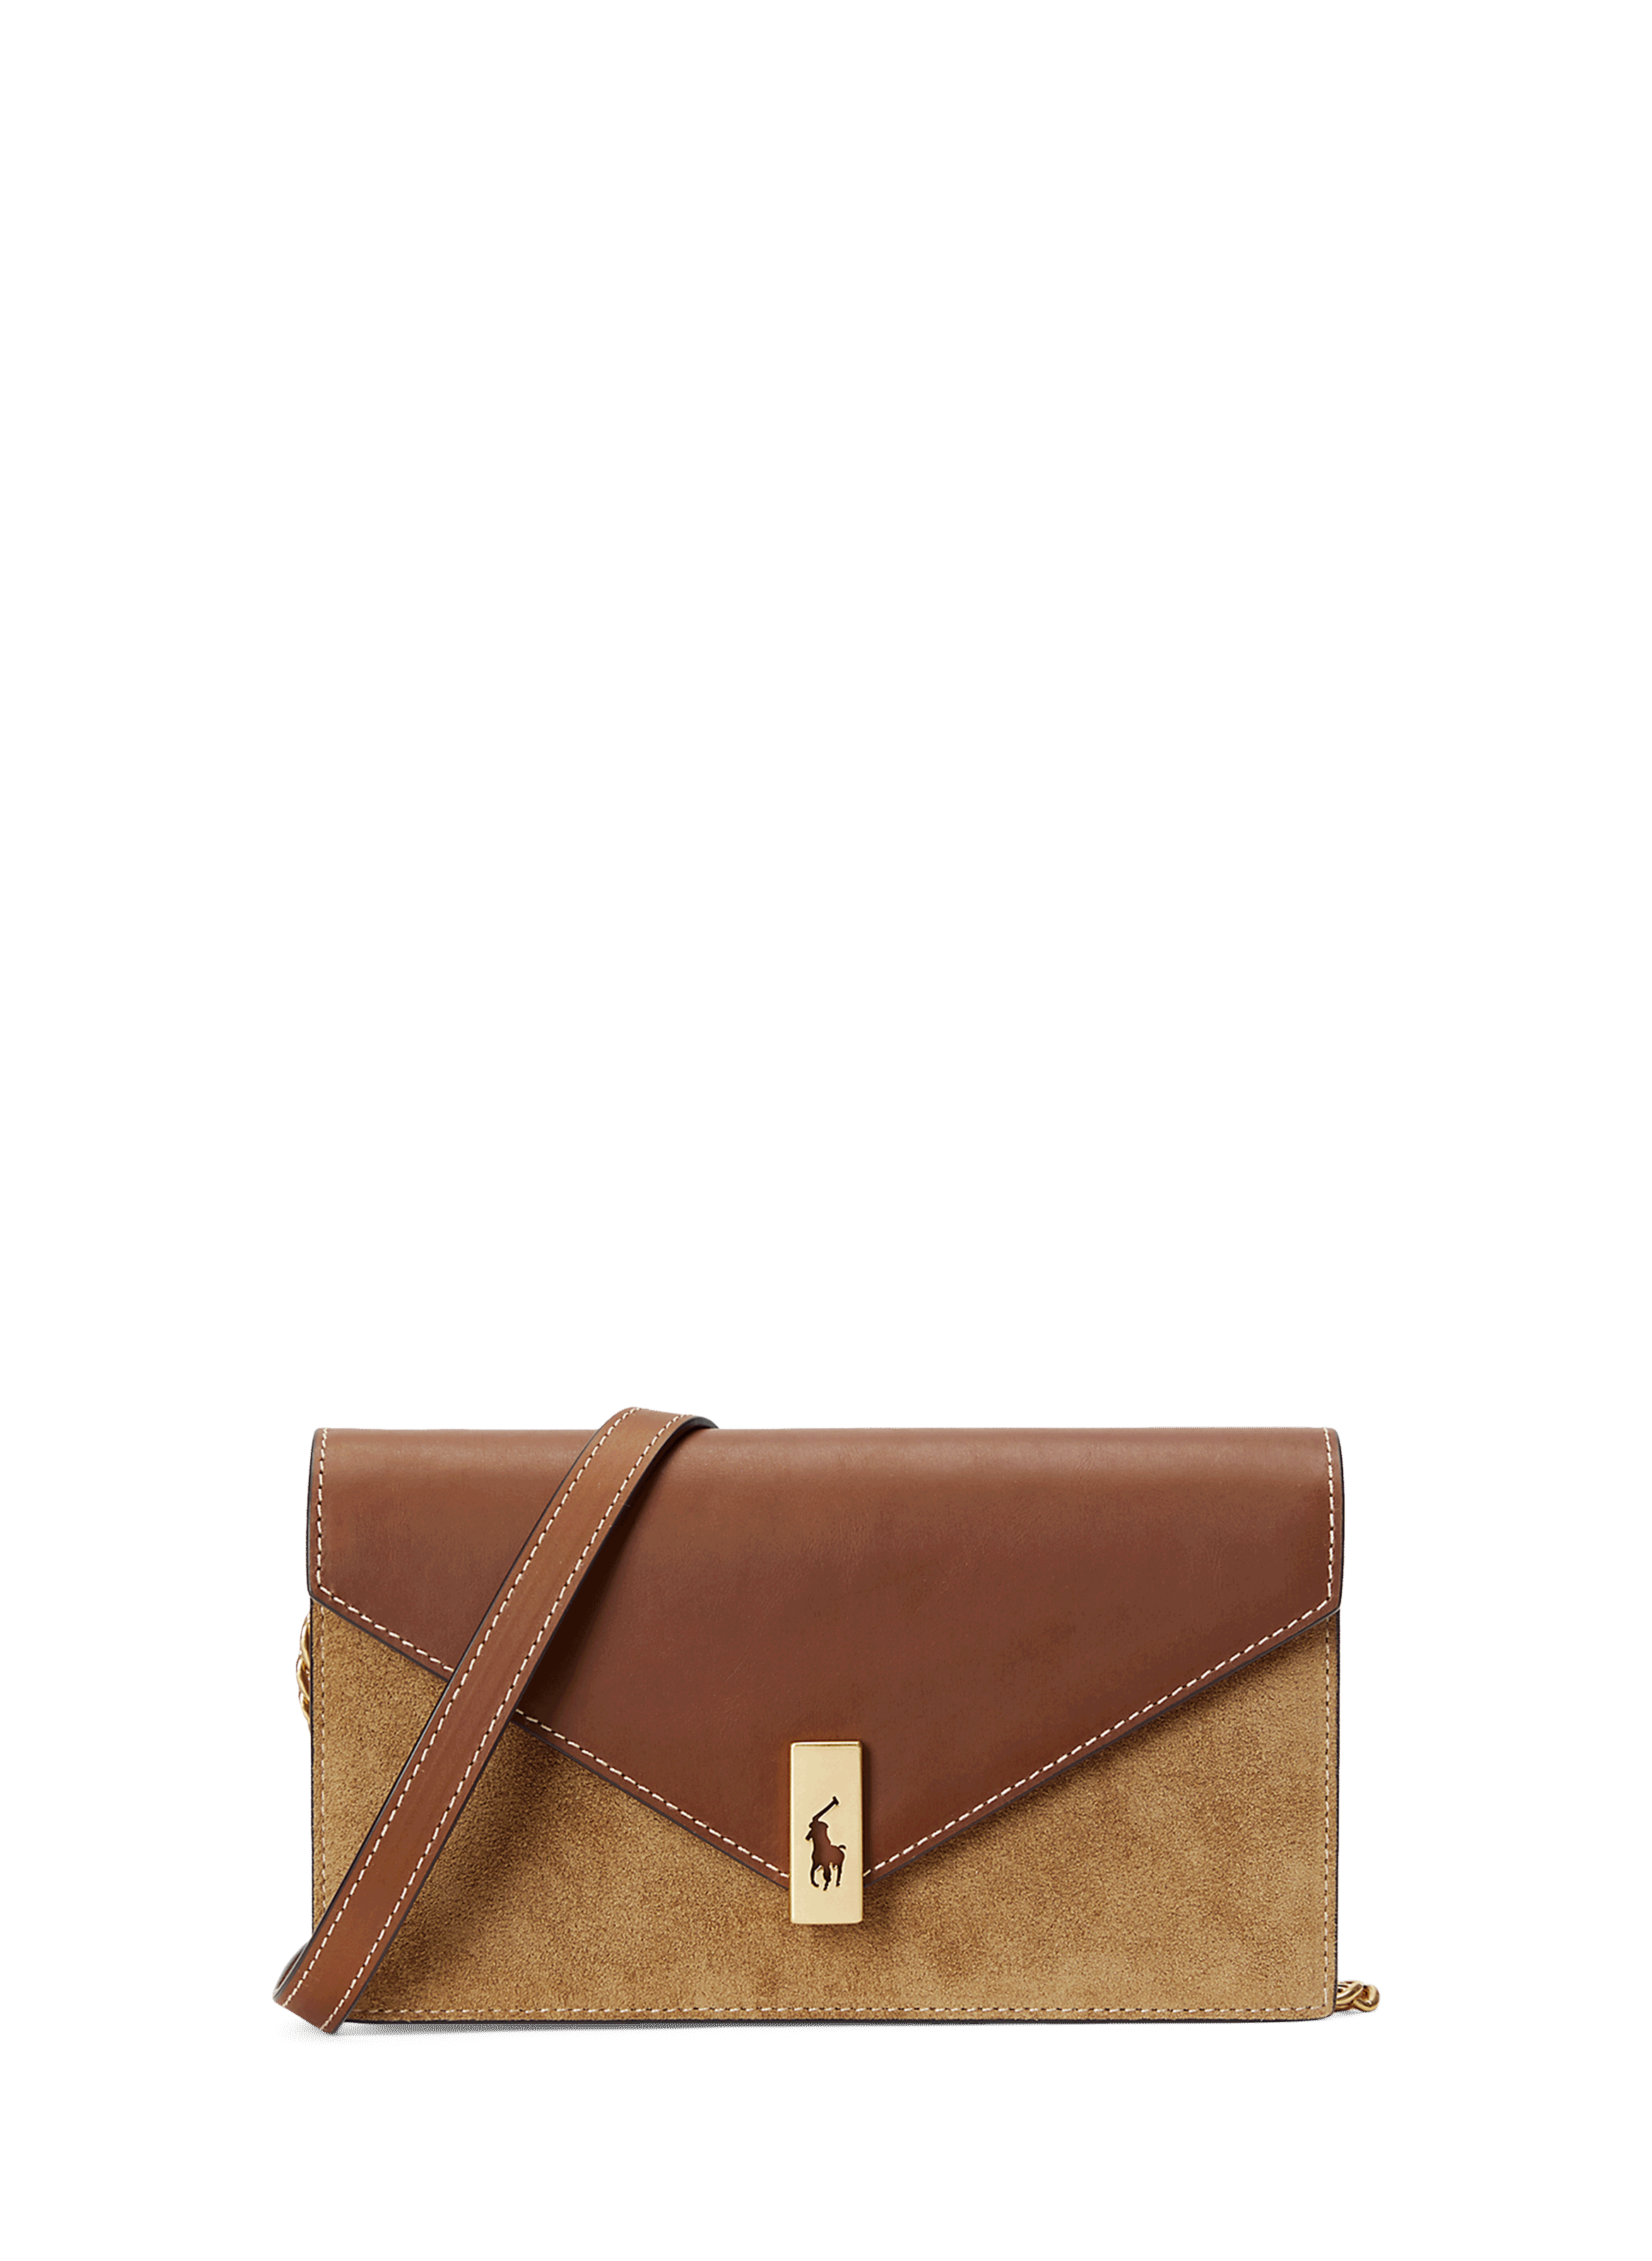 Ralph Lauren Large Leather Clutch - Brown Clutches, Handbags - WYG105101 |  The RealReal